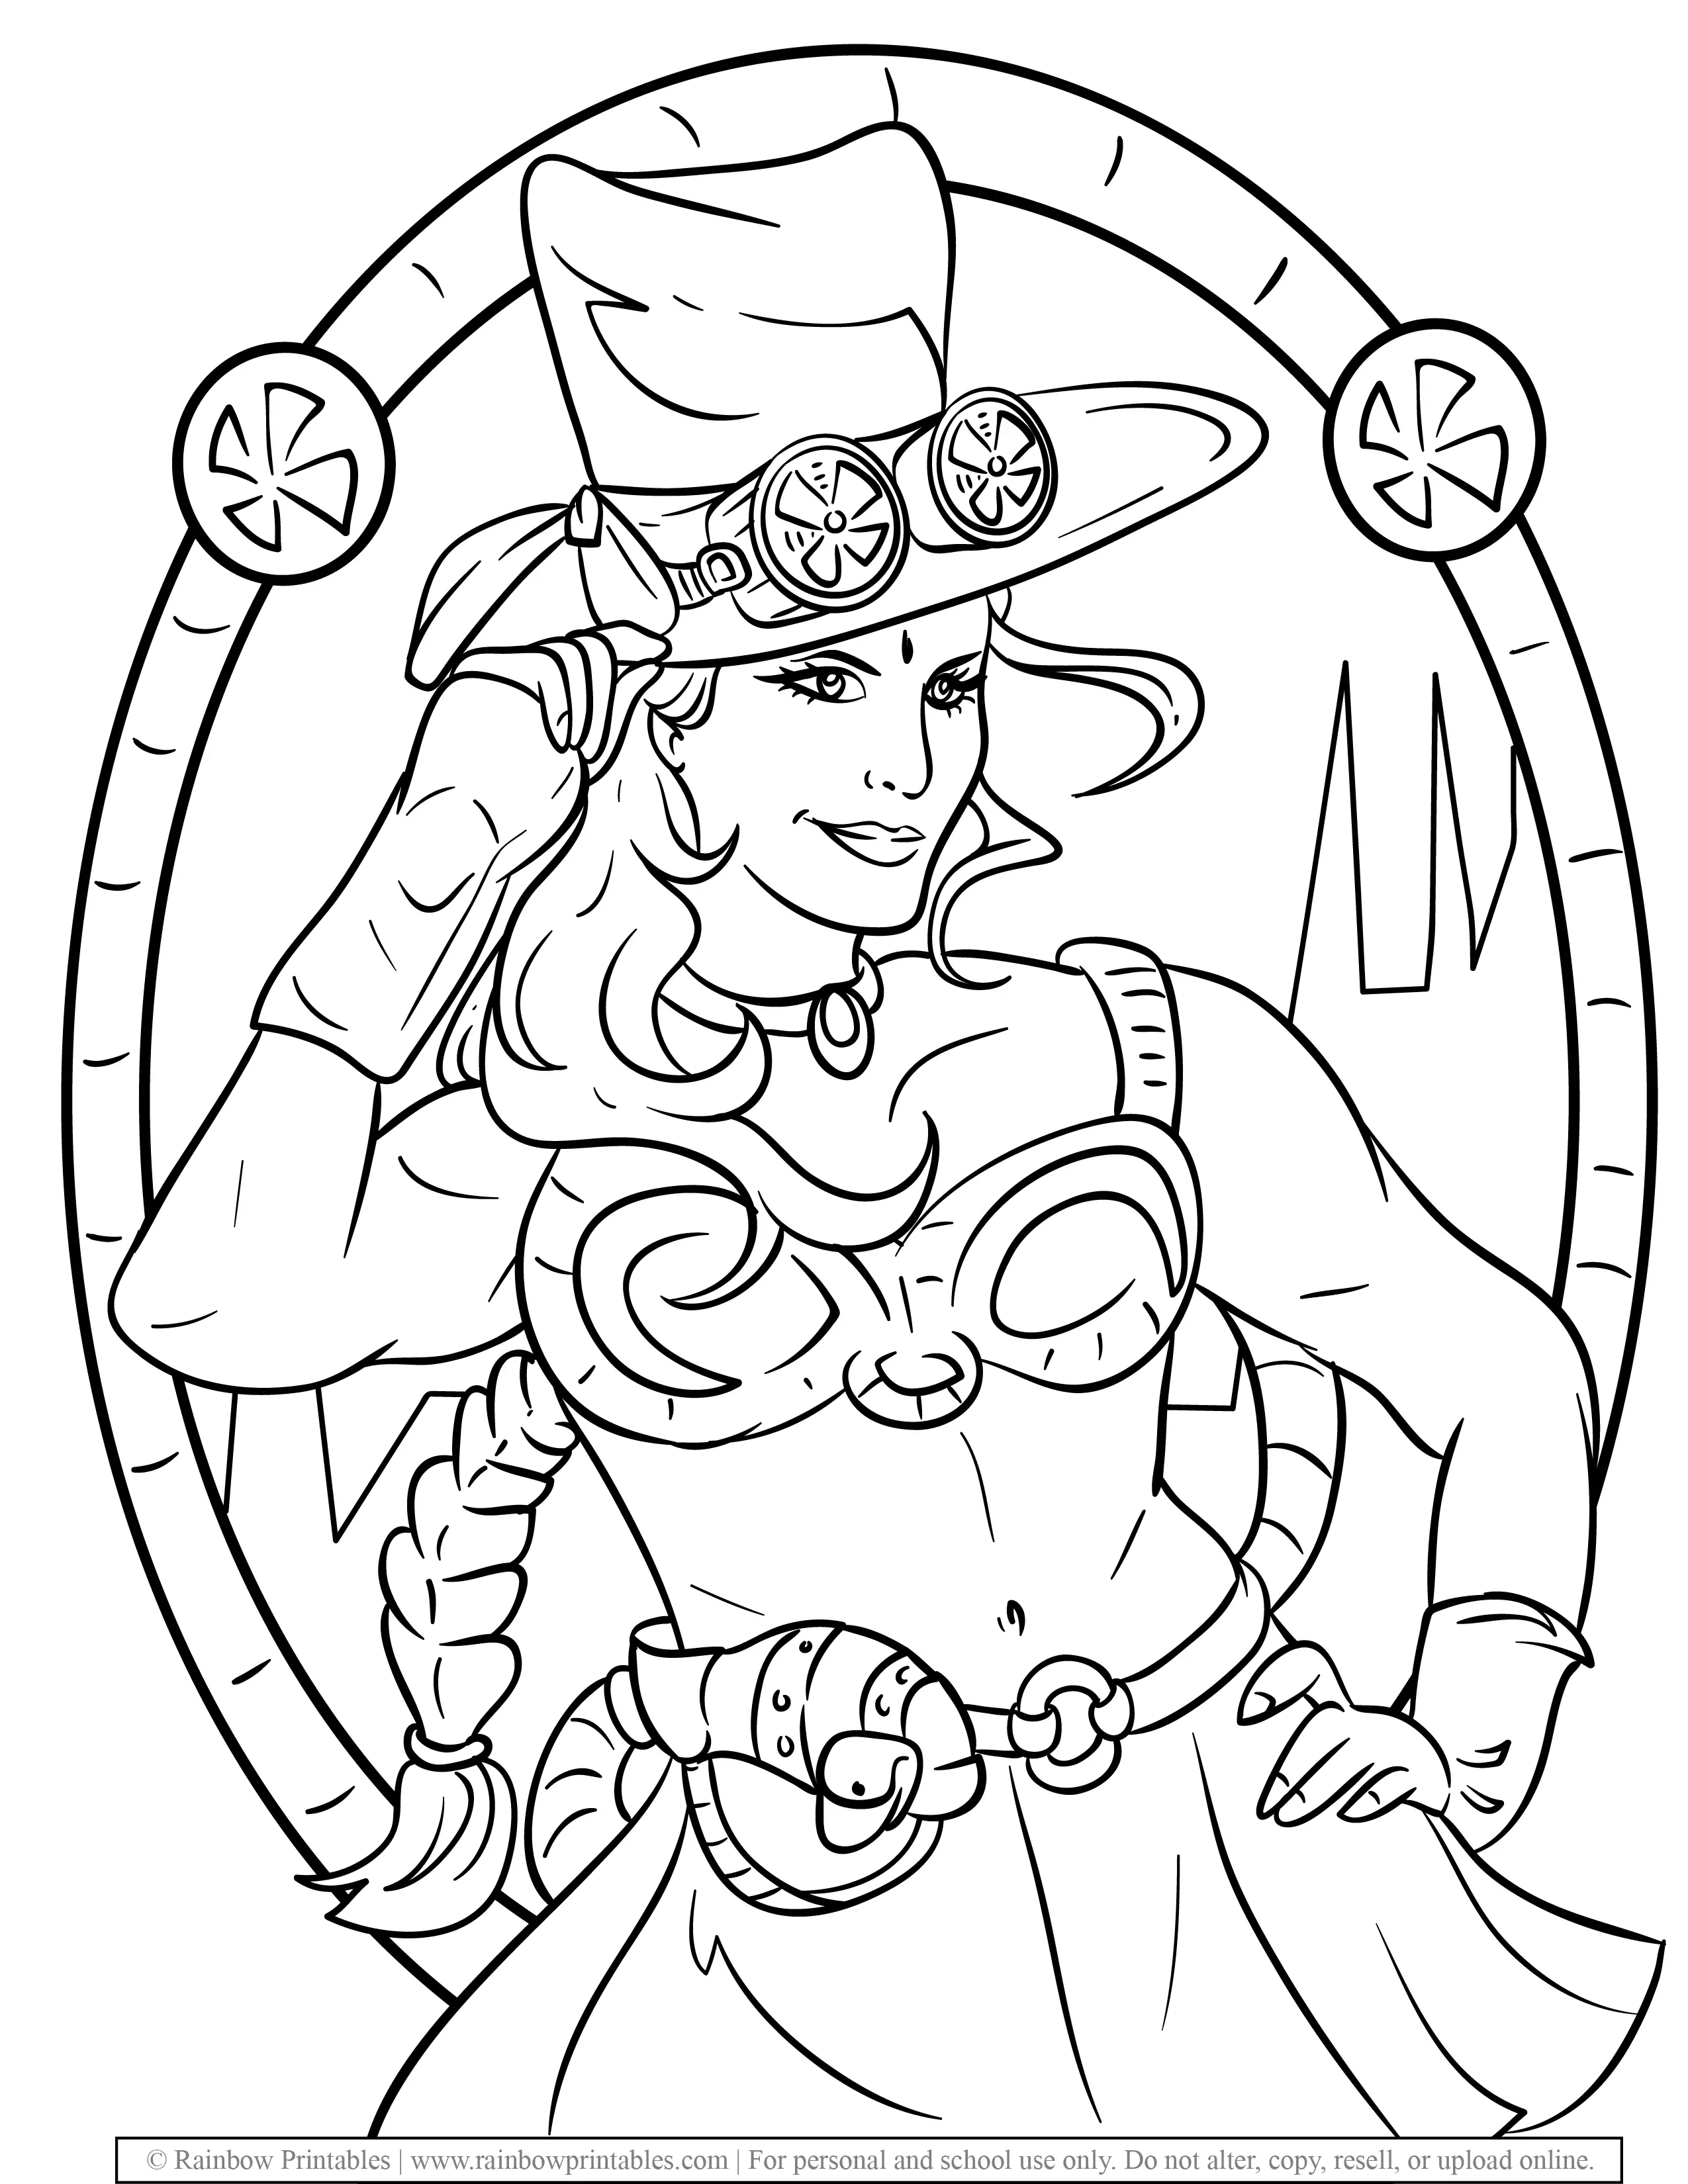 Steampunk Style Coloring Pages For Kids Adults Rainbow Printables